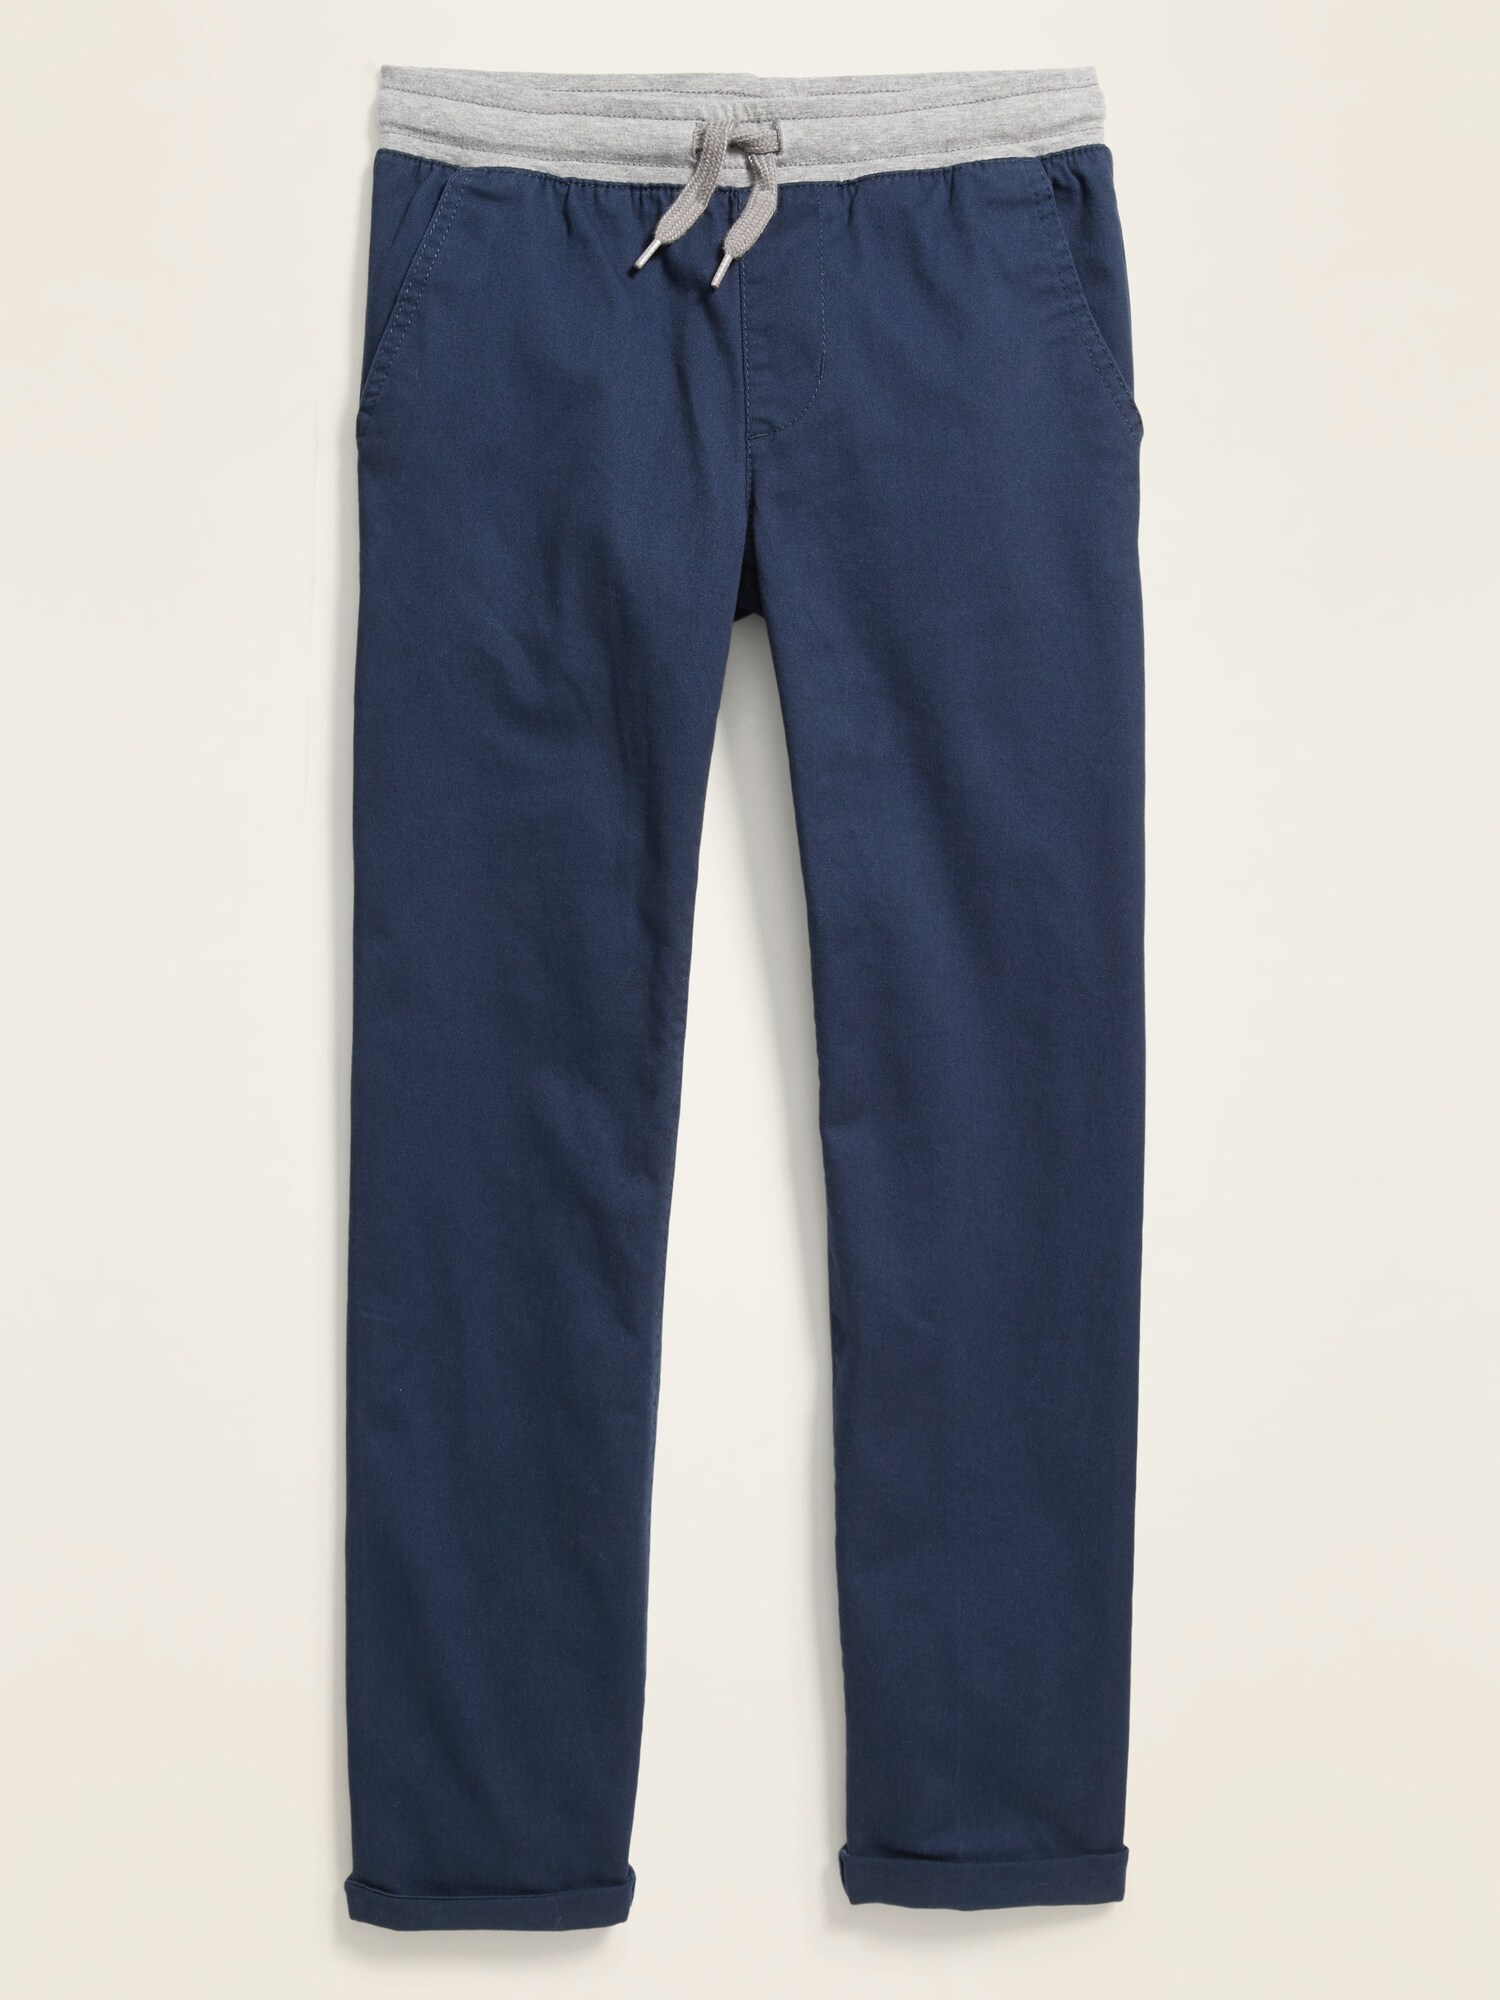 Relaxed Slim Rib-Knit Waist Built-In Flex Pants for Boys | Old Navy